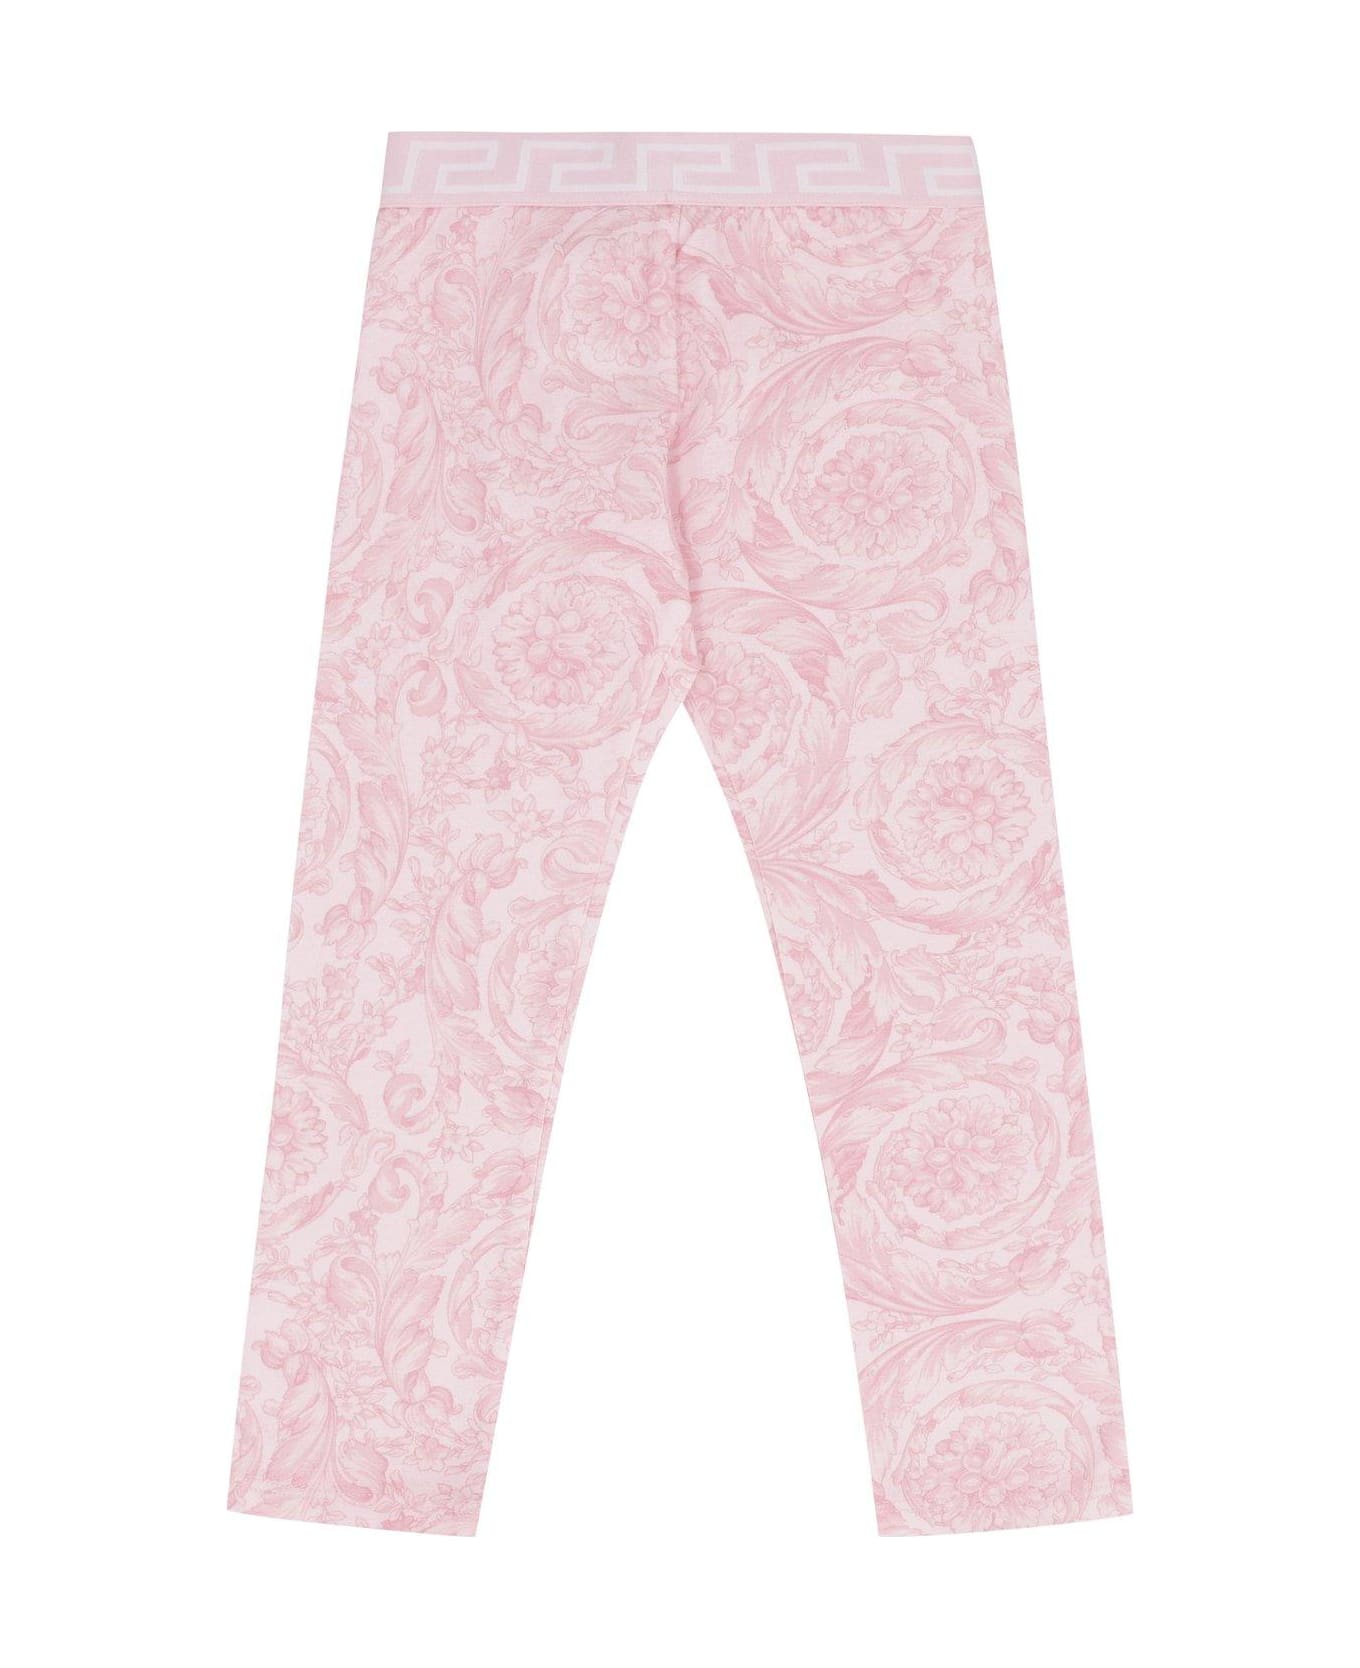 Versace Barocco-printed Stretched Leggings - Rosa ボトムス